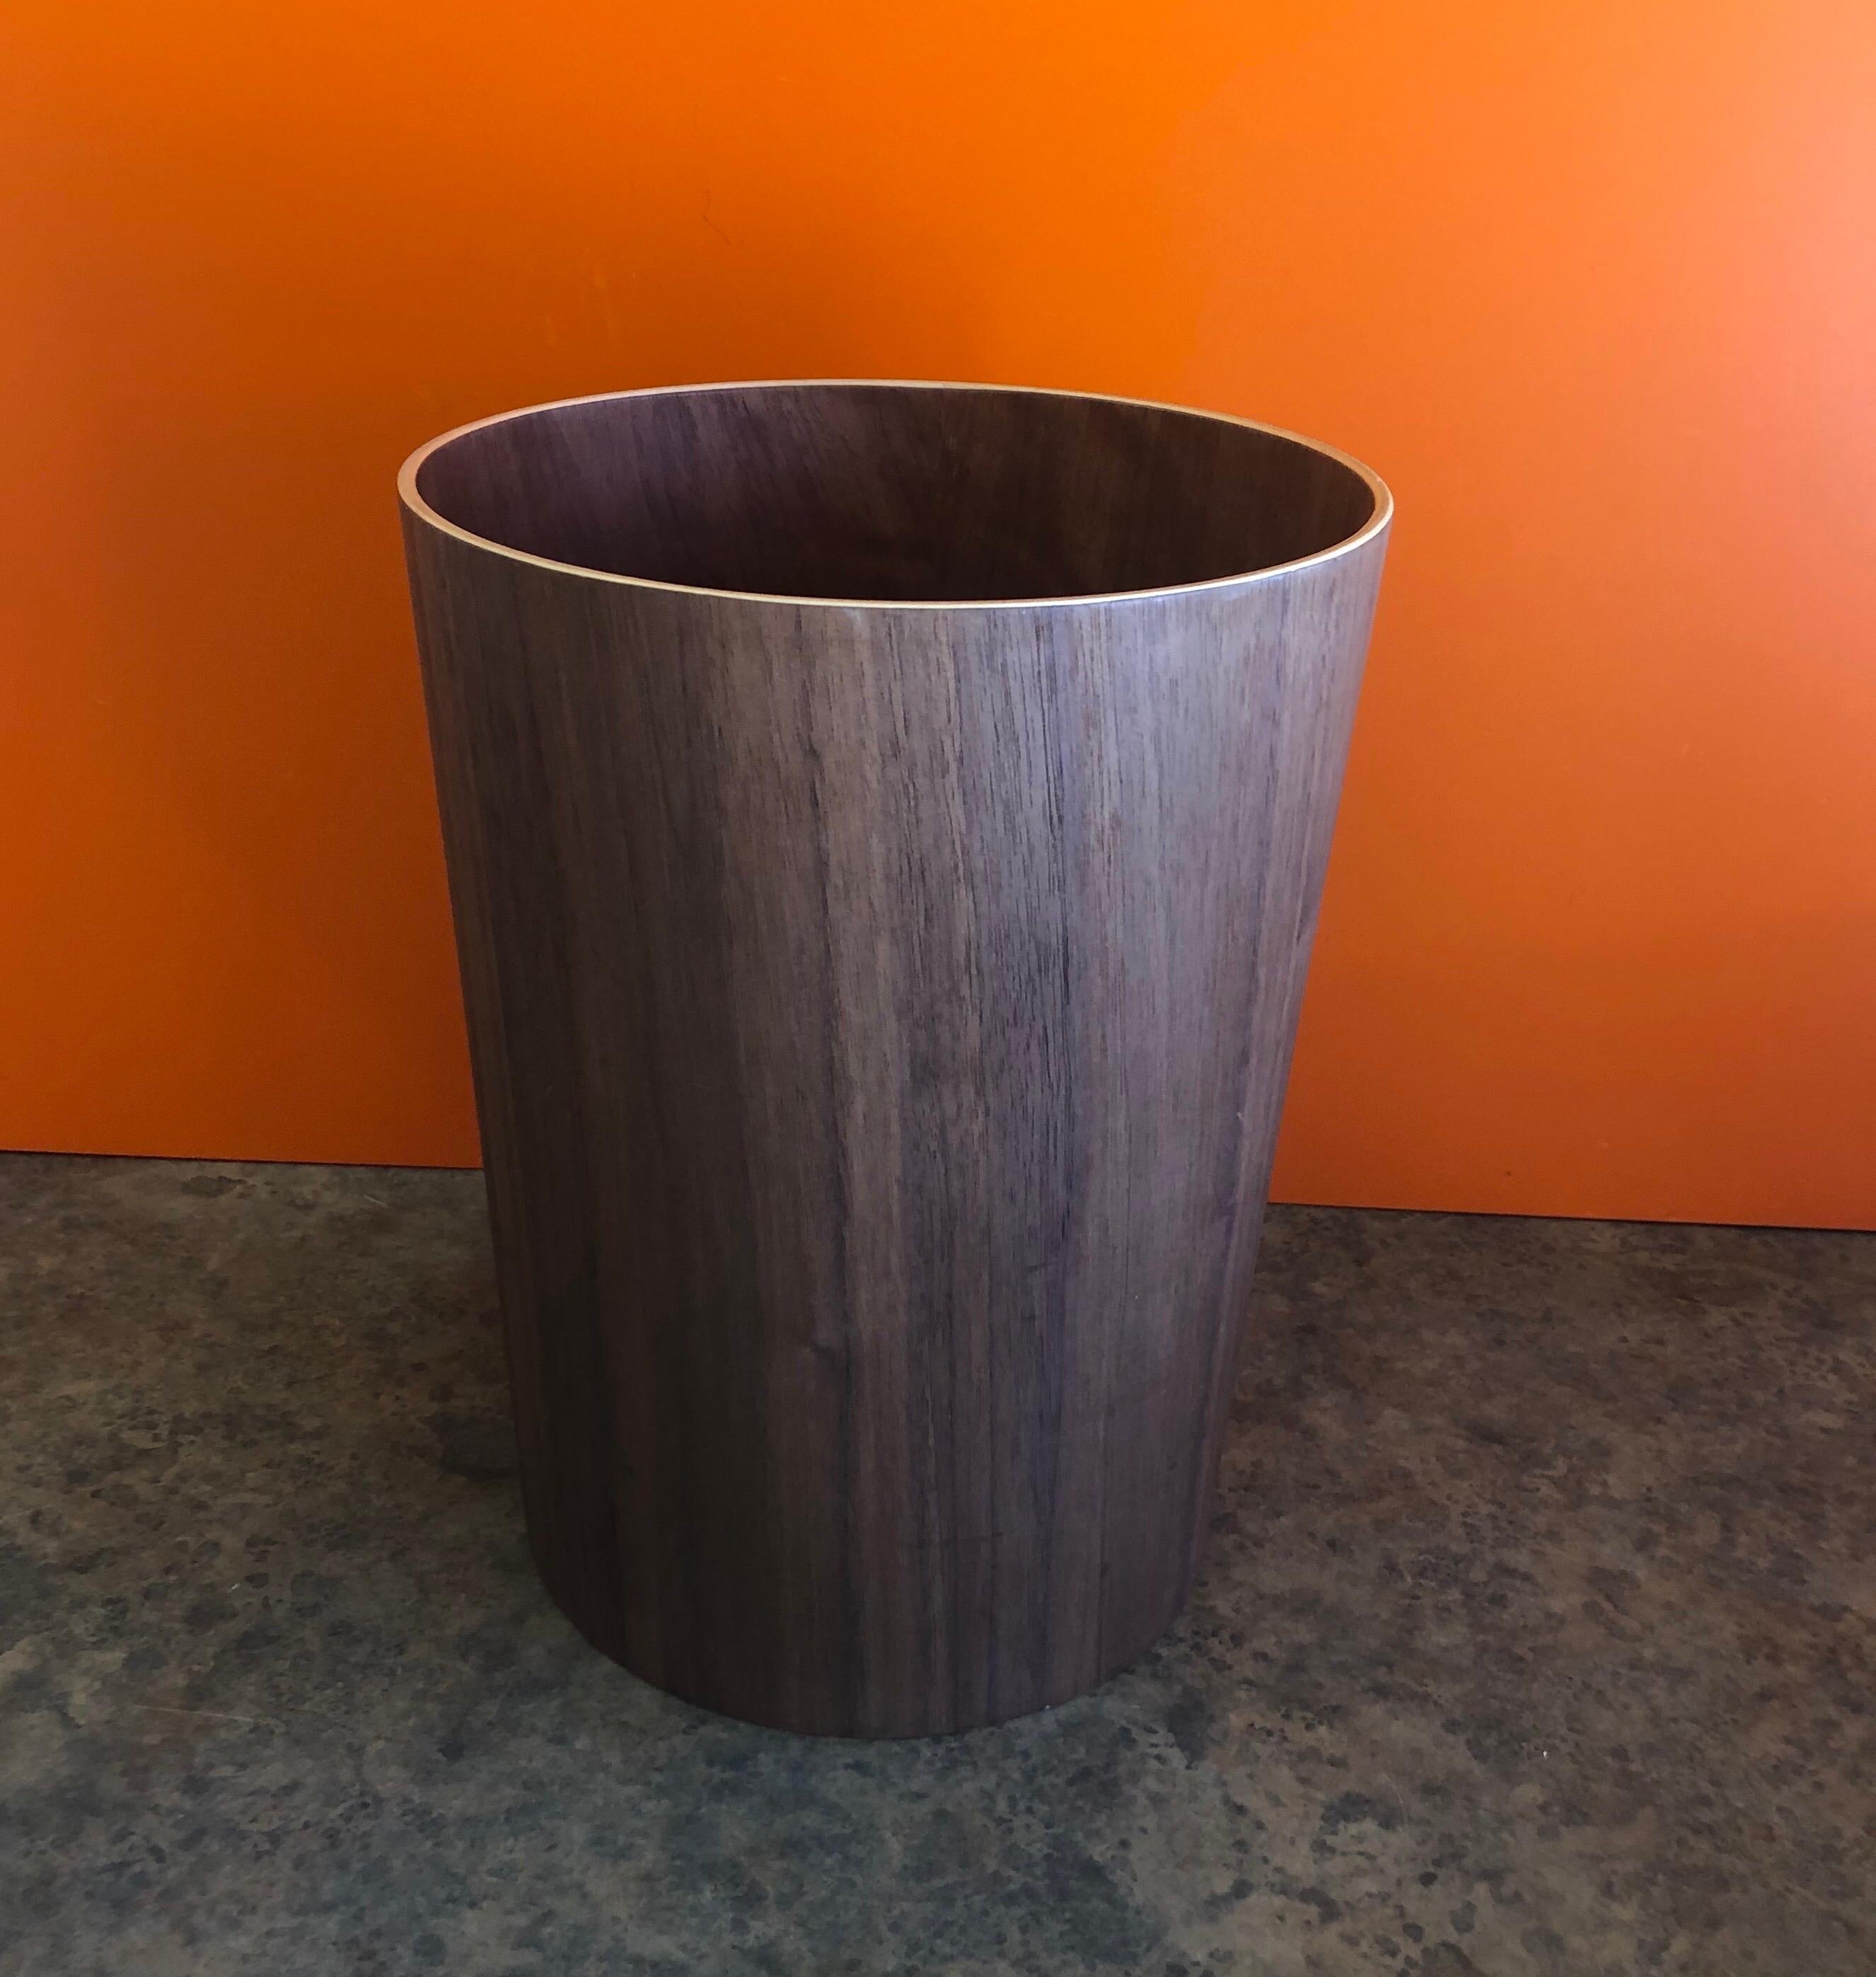 Simple and elegant teak wastebasket in the style of Martin Aberg, circa 1980s. The wastebasket is in excellent condition no chips or cracks and measures 9.25